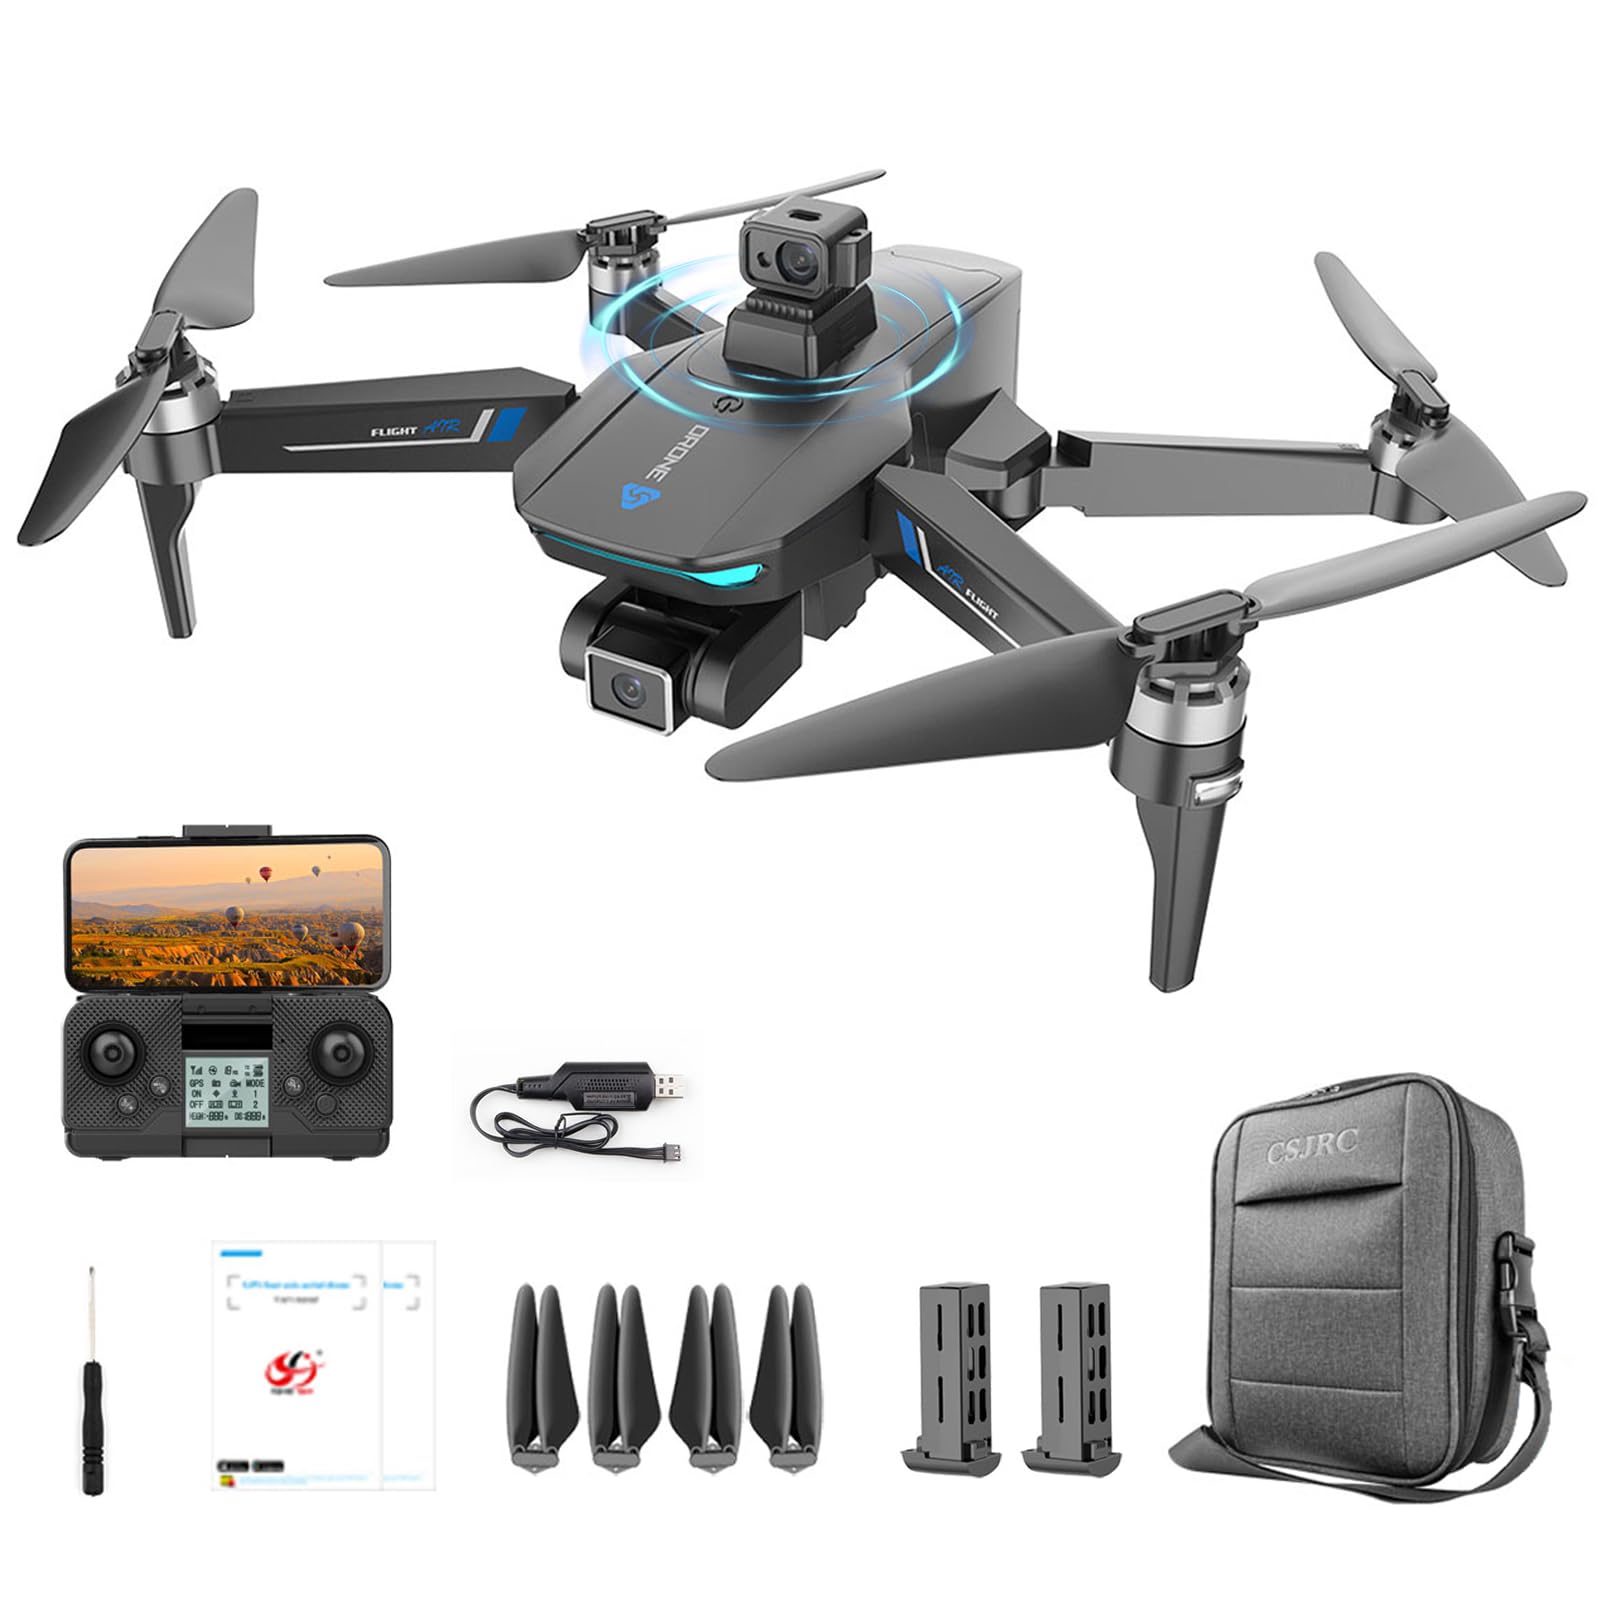 HYTOBP S189 Max Drone with Camera, 8K EIS Camera, Laser Obstacle Avoidance, 60 Mins Flight, 2 Batteries, Brushless Motor, GPS Auto Return, Resistant to wind level 8, 5GHz Transmission, Follow Me, Drones for adults Long Range